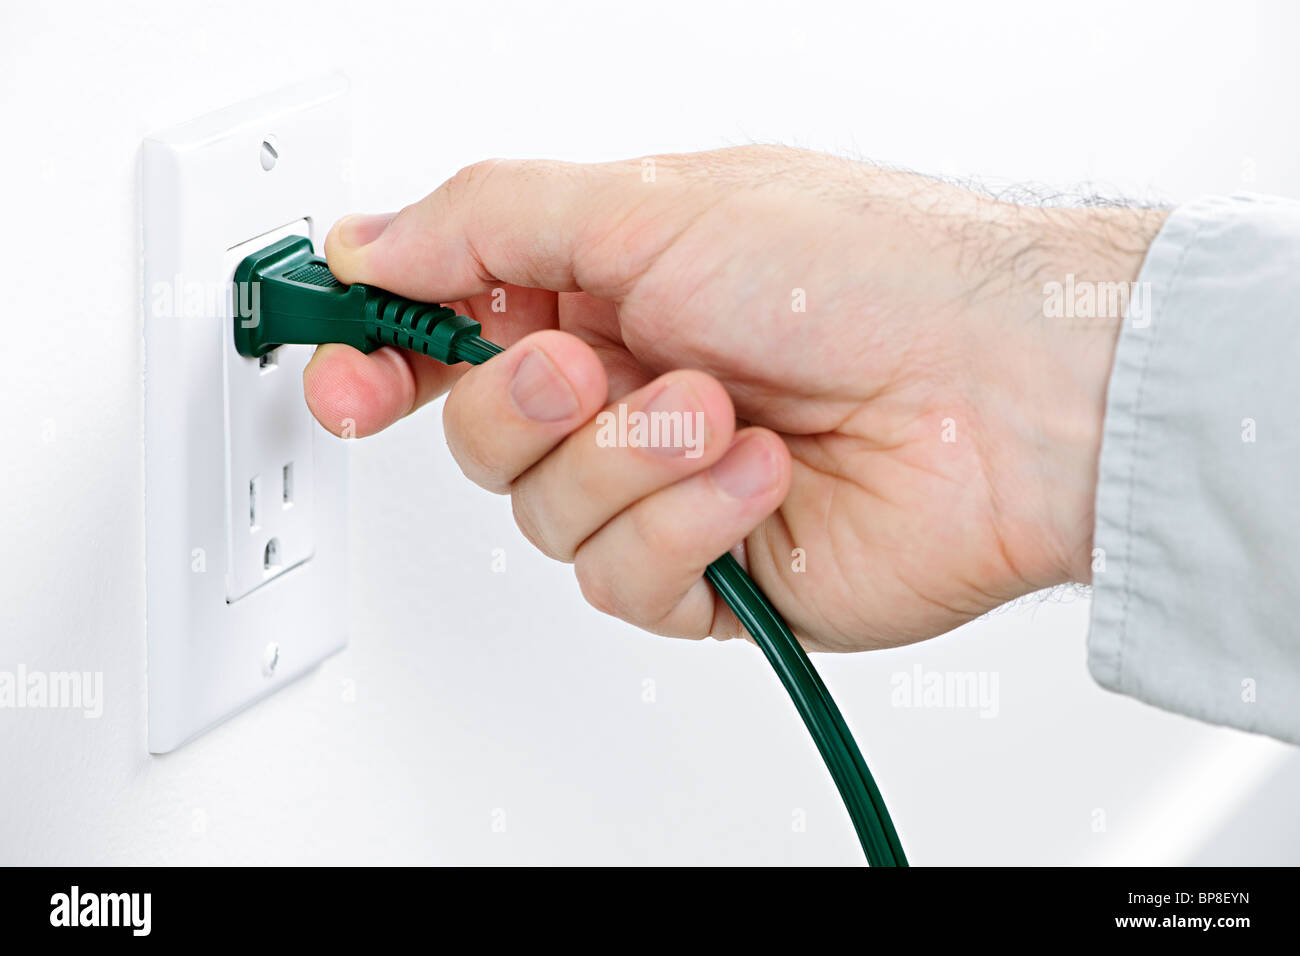 Hand pulling green electrical plug from outlet Stock Photo